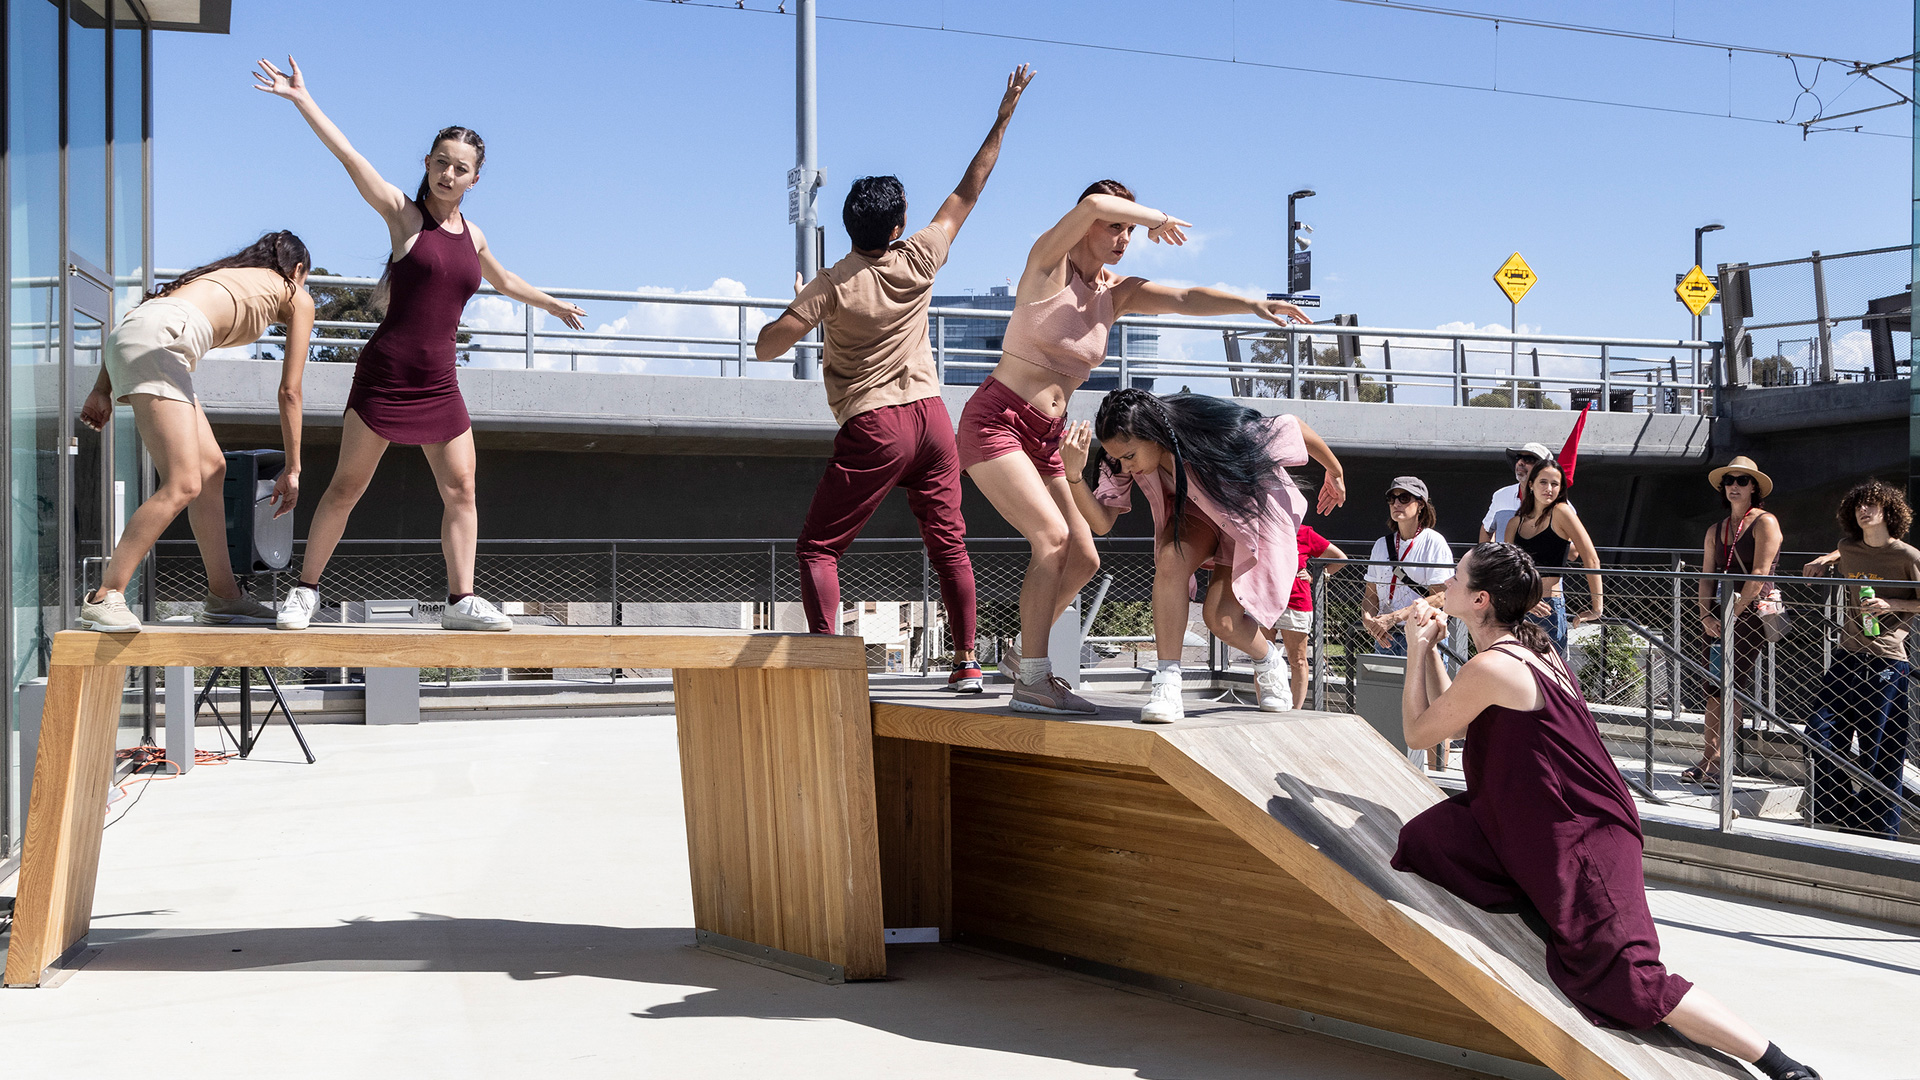 Moving Spaces by San Diego Dance Theater - WOW Festival 2023